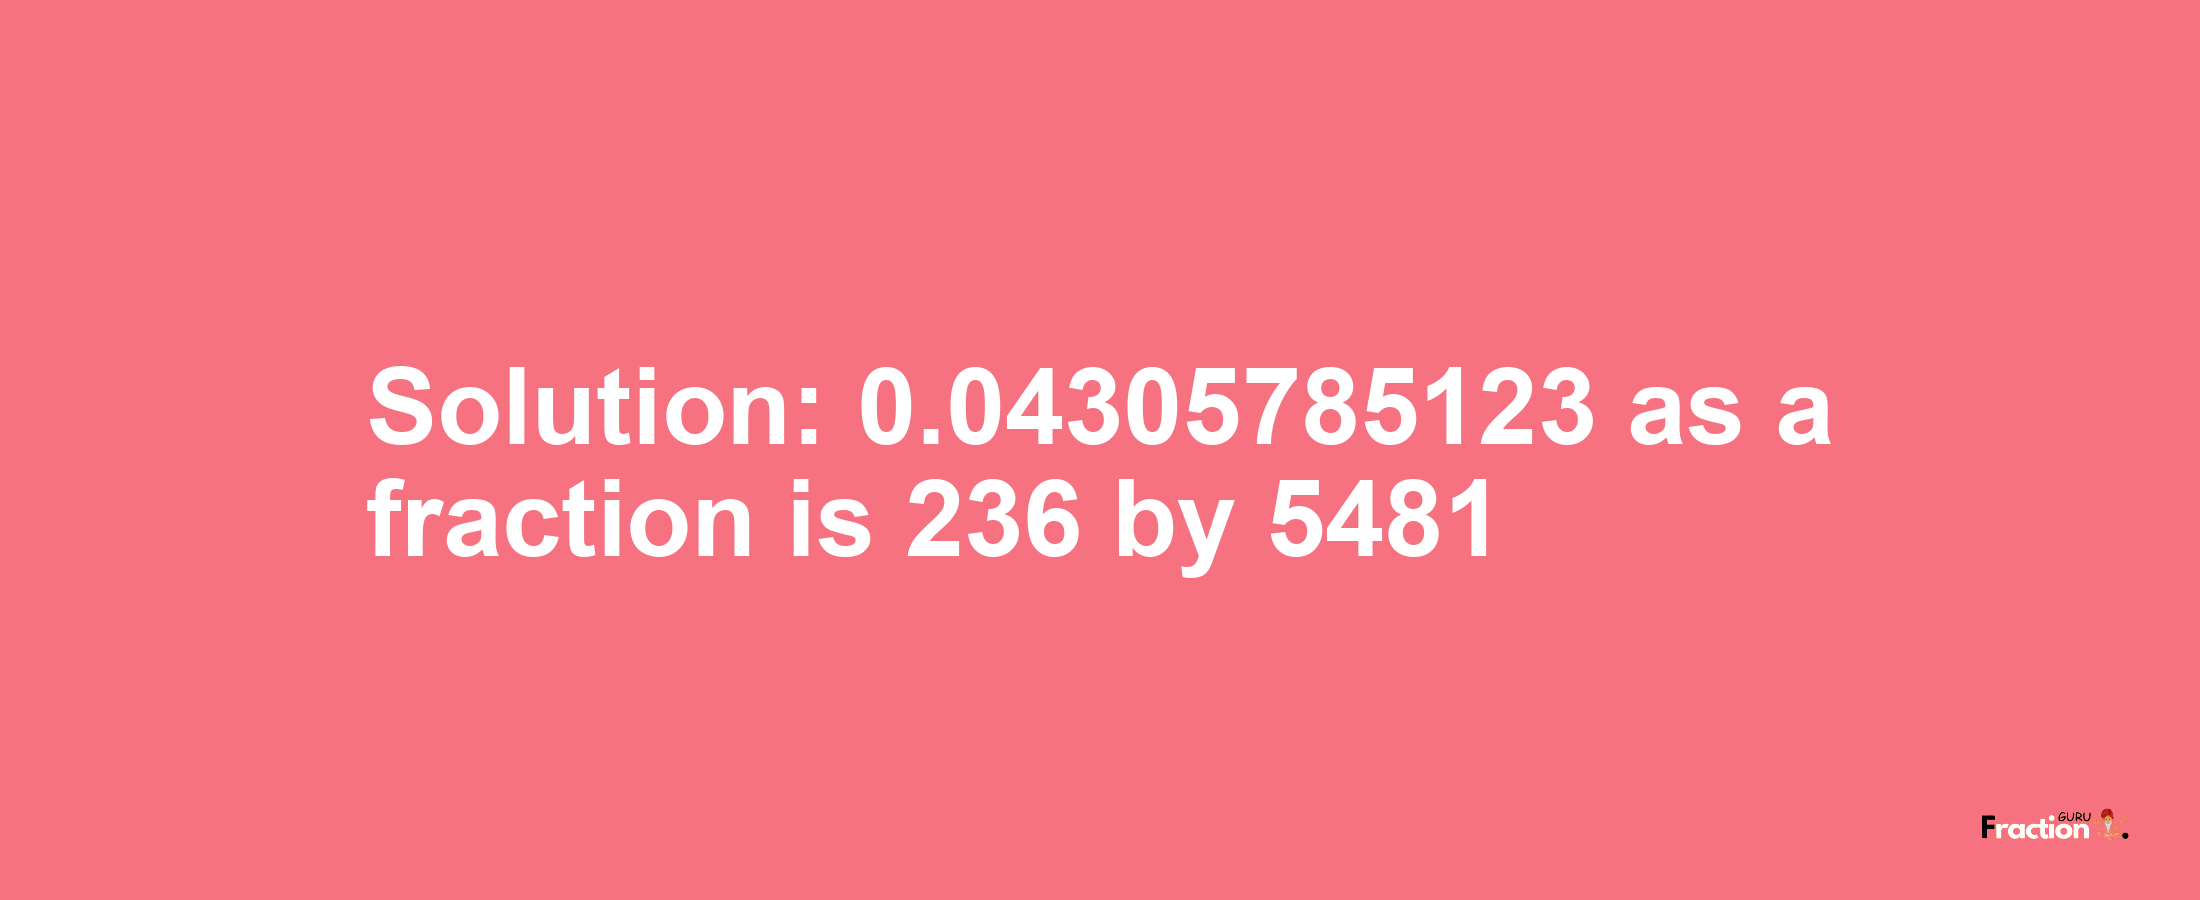 Solution:0.04305785123 as a fraction is 236/5481